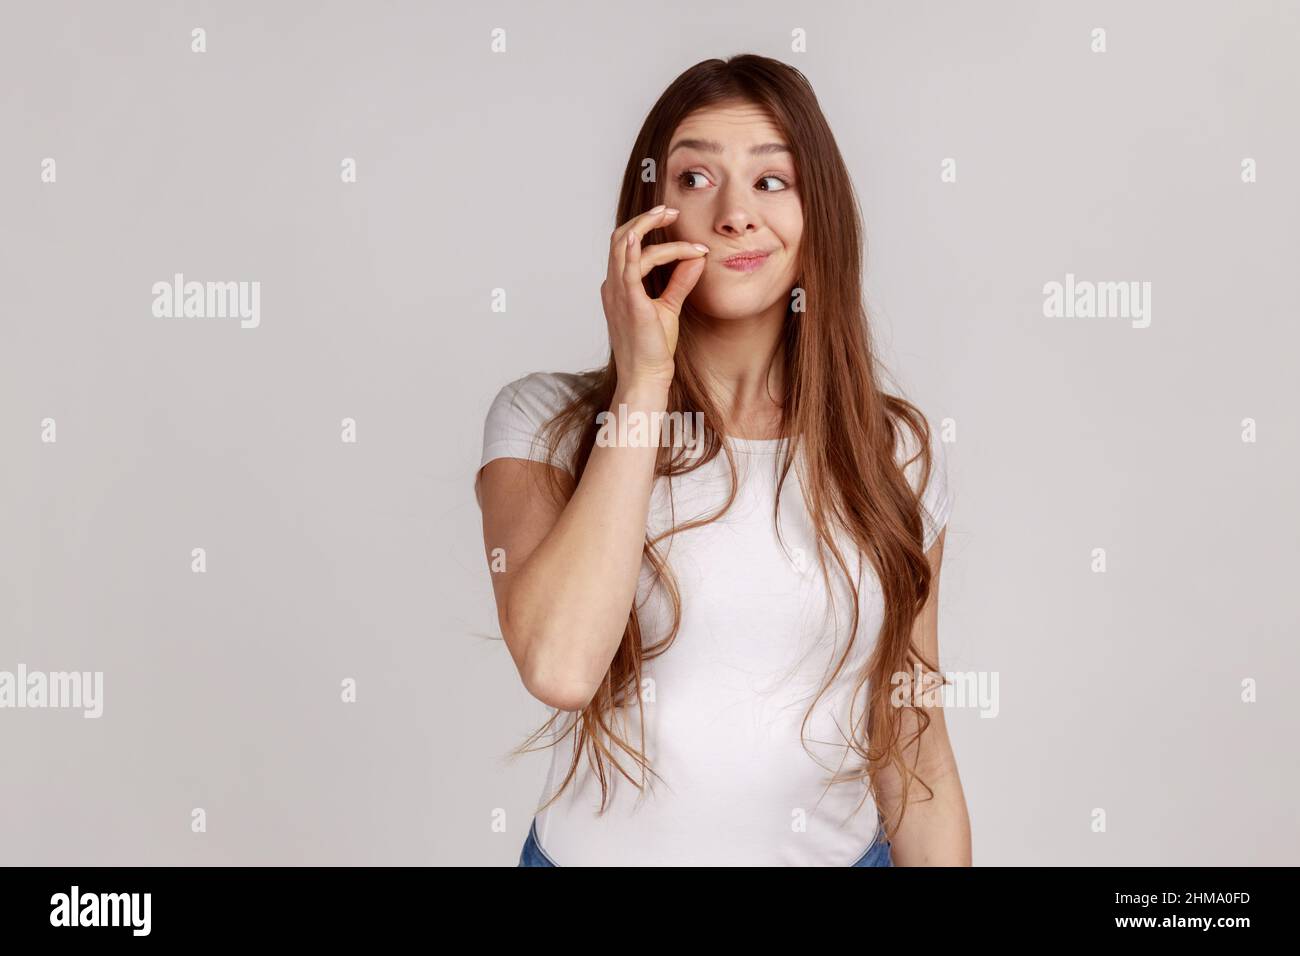 Attractive woman with long dark hair and mystery look making zip gesture to close mouth, keeping secret, zipping lips, wearing white T-shirt. Indoor studio shot isolated on gray background. Stock Photo